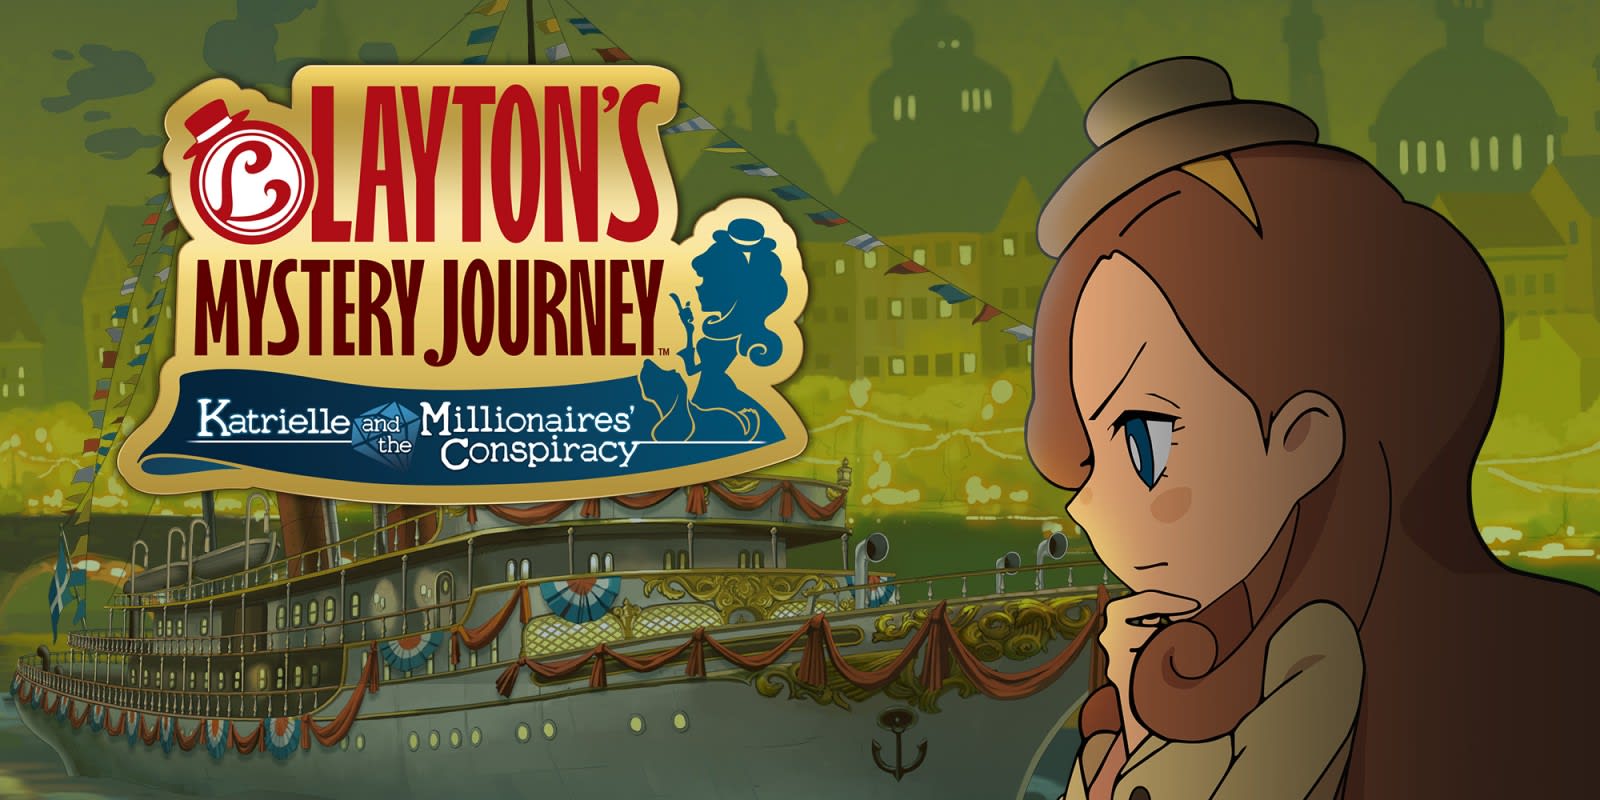 layton-s-mystery-journey-katrielle-and-the-millionaires-conspiracy-nintendo-3ds-games